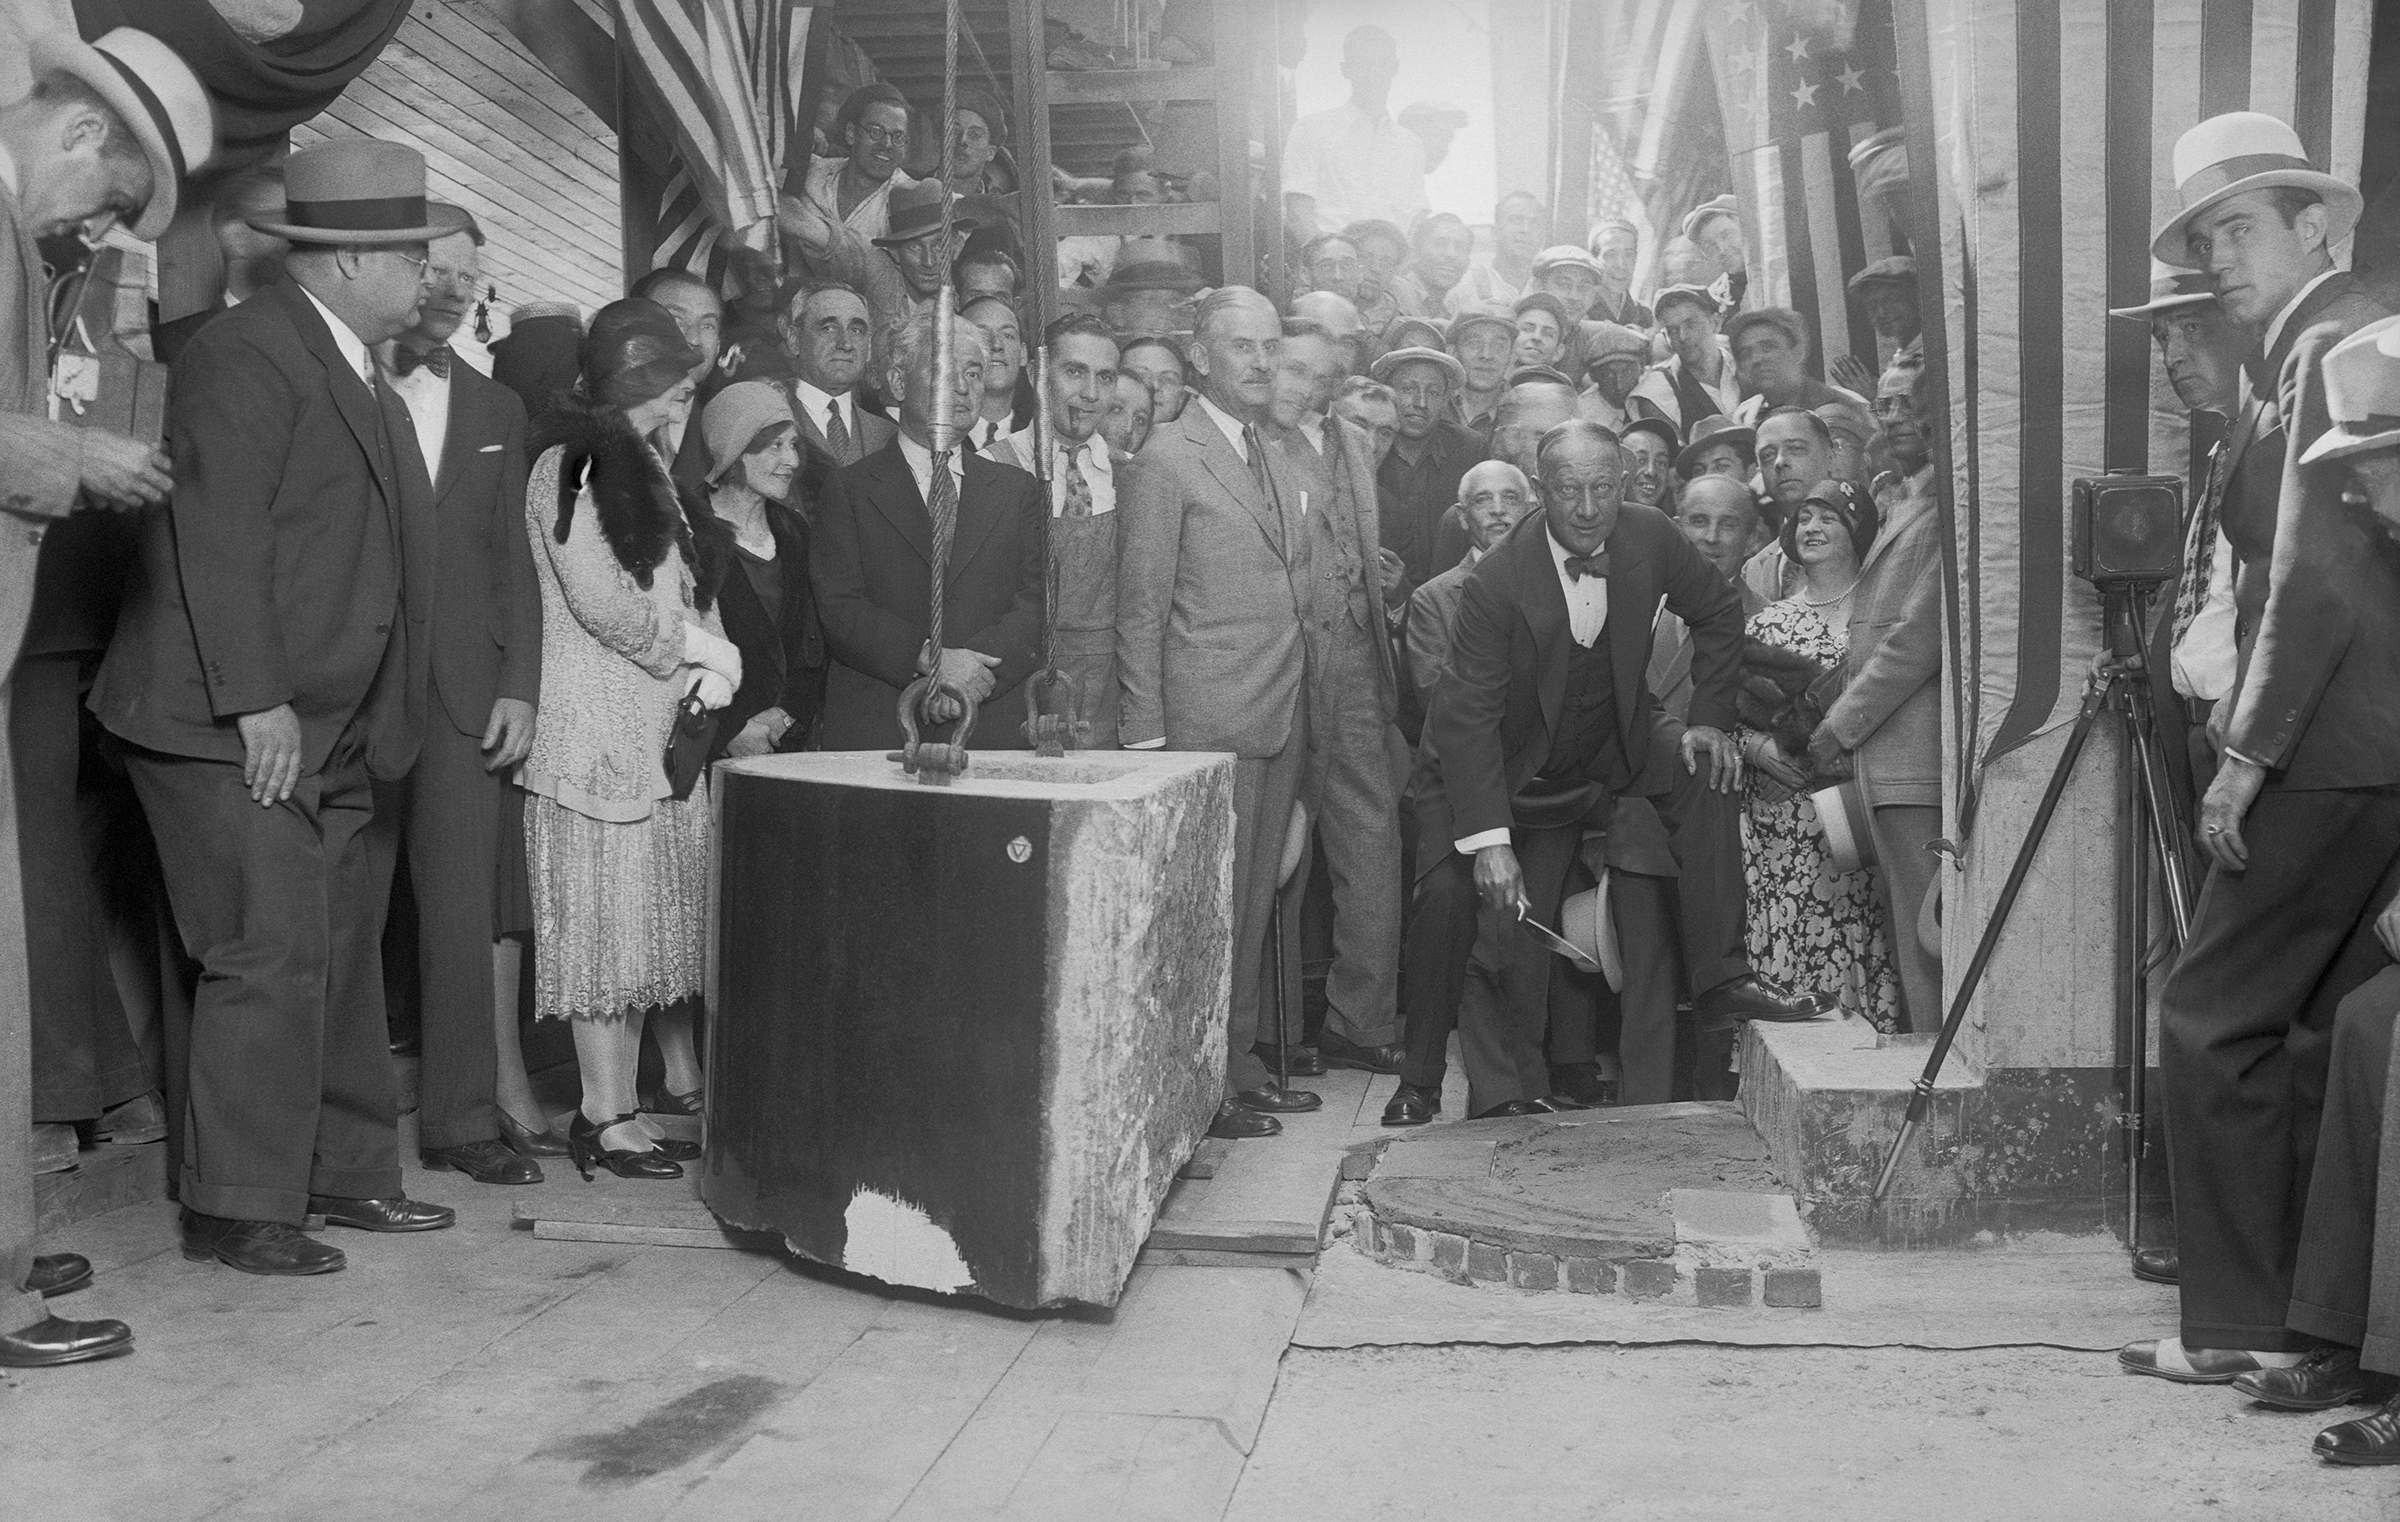 As possessor of a gold membership card in the bricklayers' union, Alfred Smith performed a thorough job when he laid the cornerstone for the Empire State Building on Fifth avenue and 34th street, New York City, before a crowd of onlookers on Sept. 9, 1930. (Bettmann Archive/Getty Images)